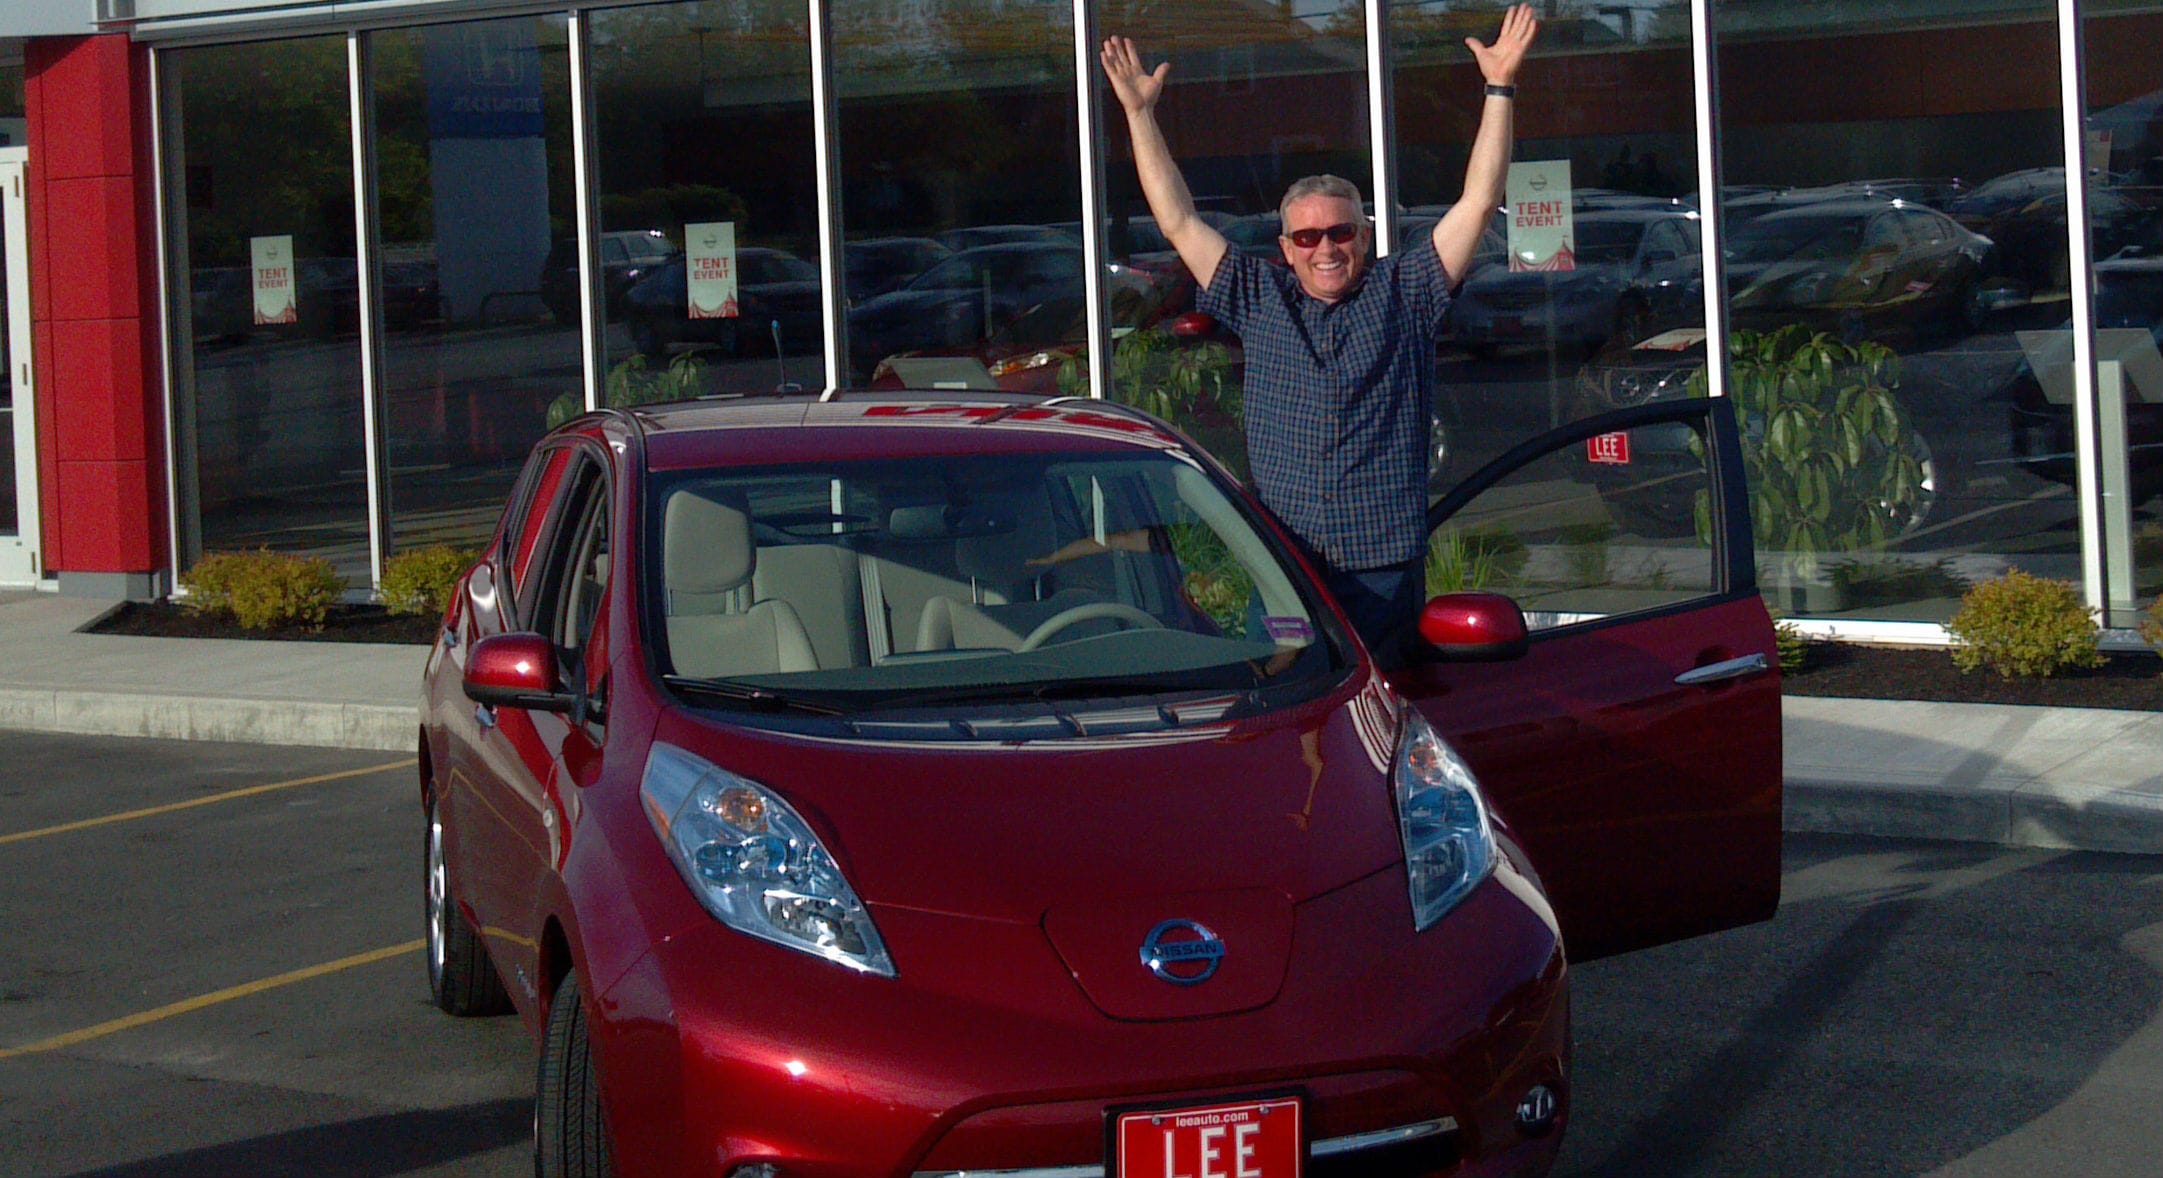 how-you-can-get-4-000-in-illinois-electric-vehicle-rebate-shaw-local